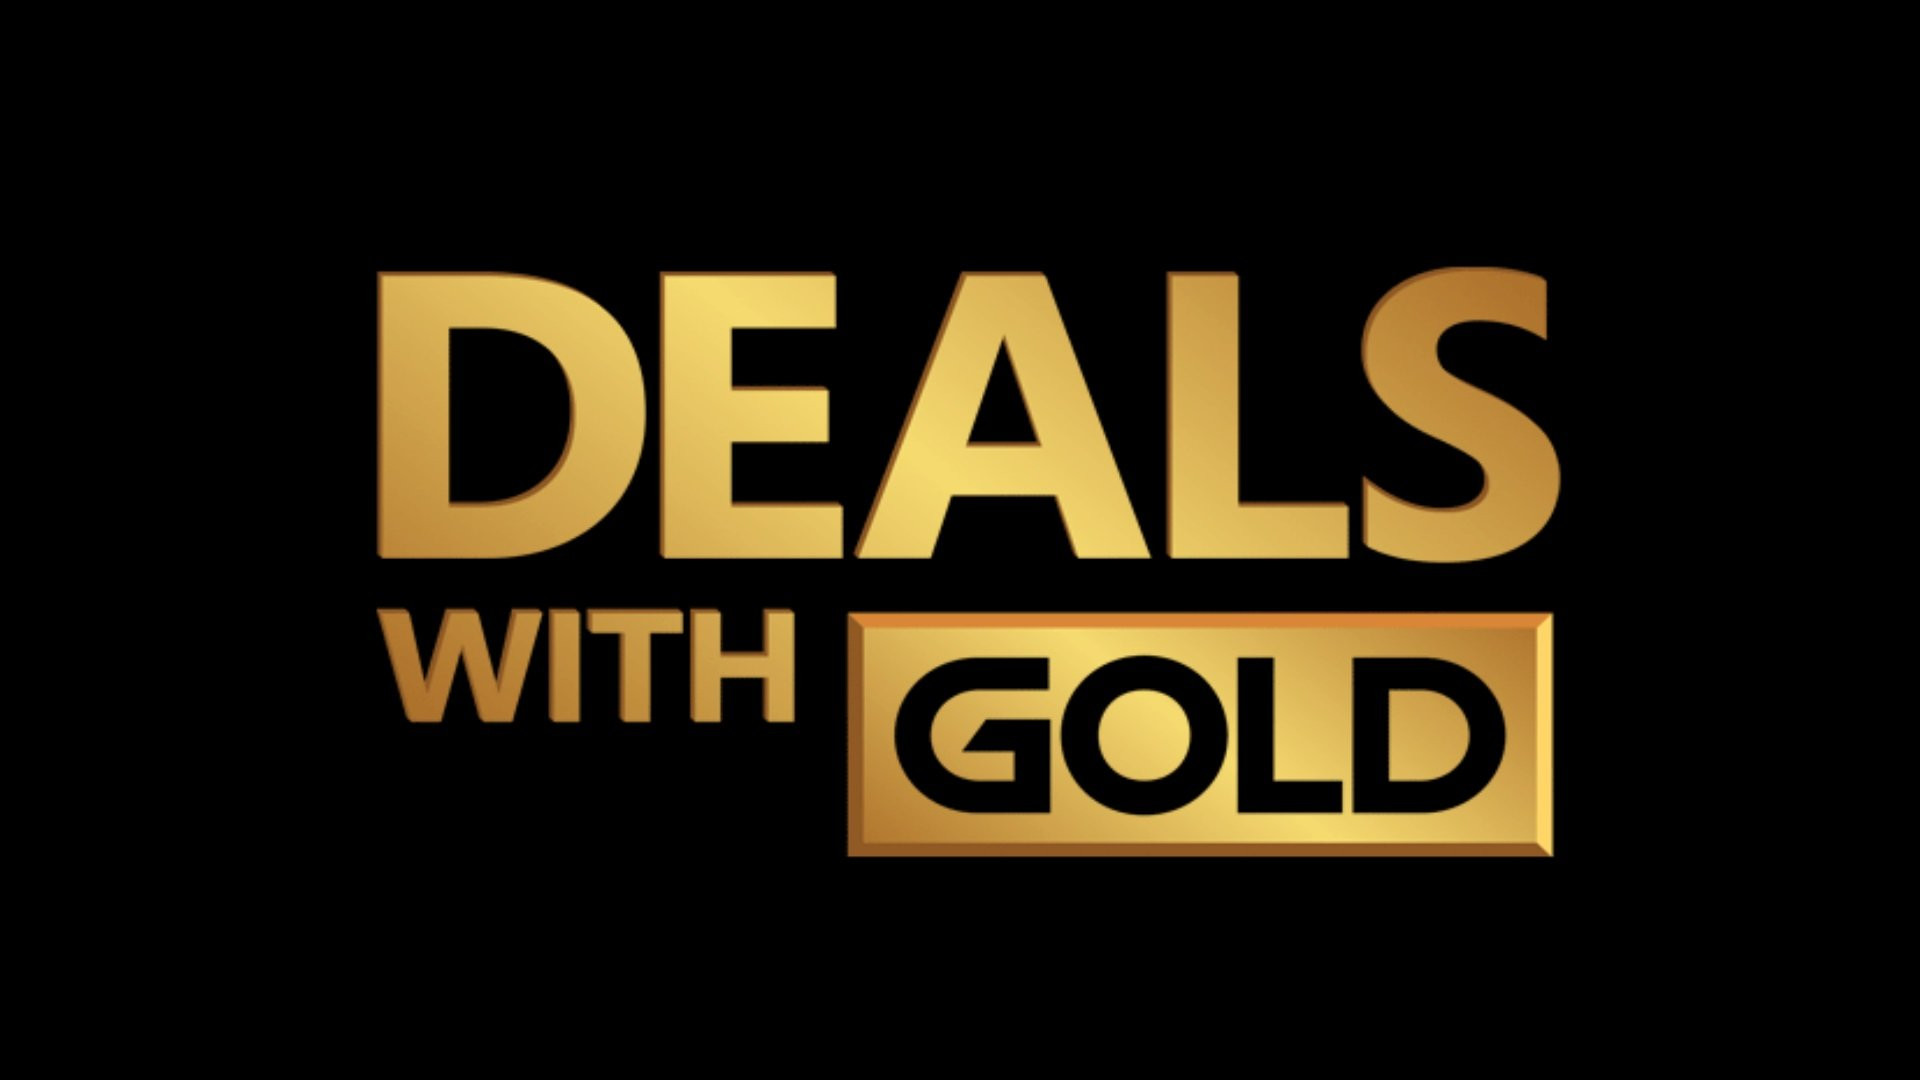 Deals with Gold semaine 41